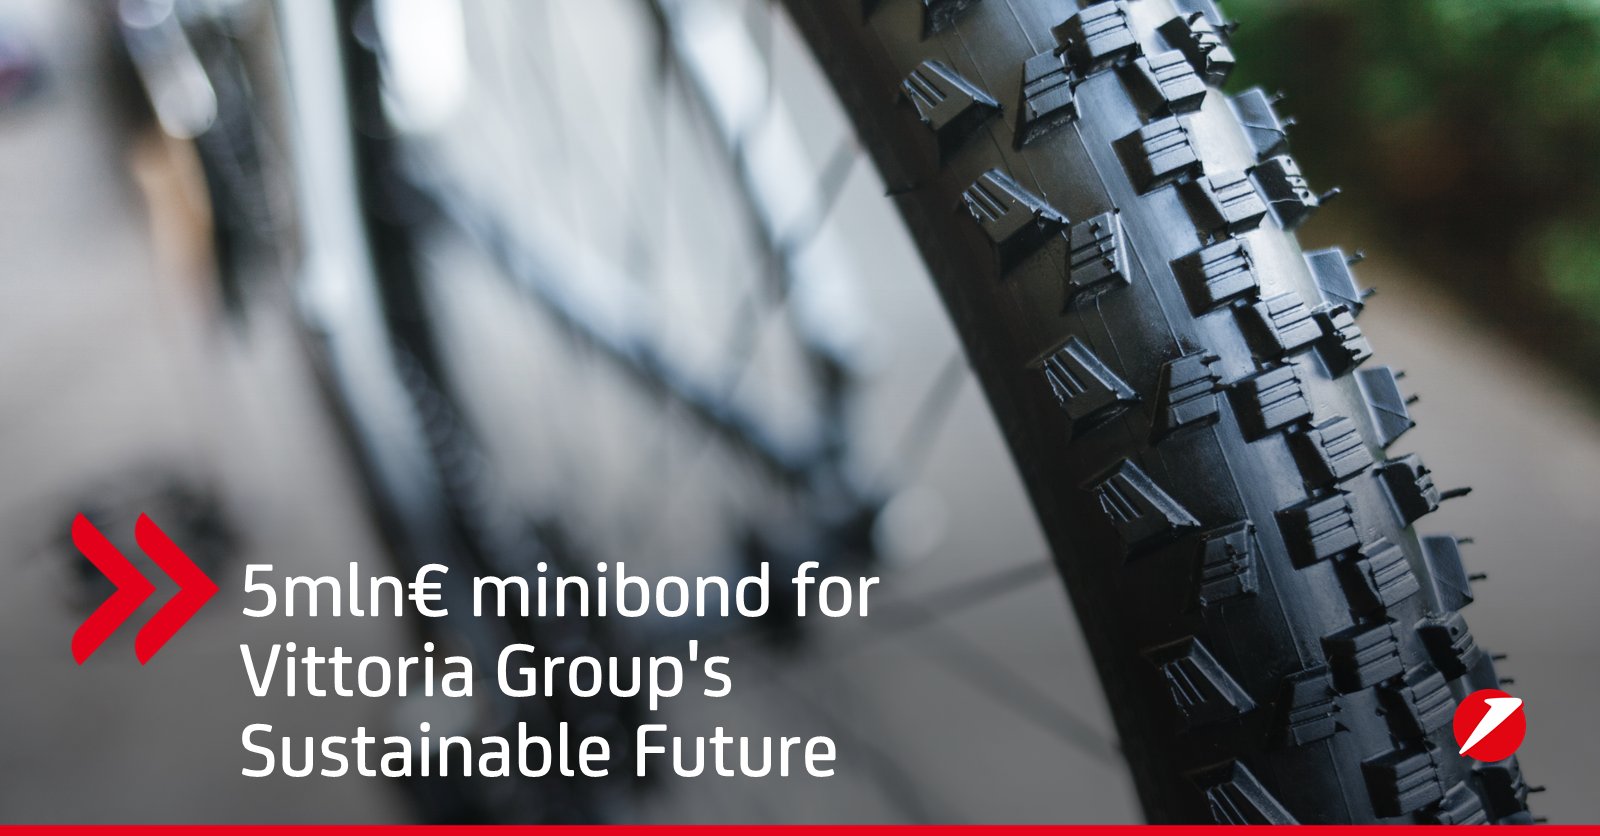 To fund its ESG initiatives, Vittoria issues a 5 million sustainability-linked bond through UniCredit